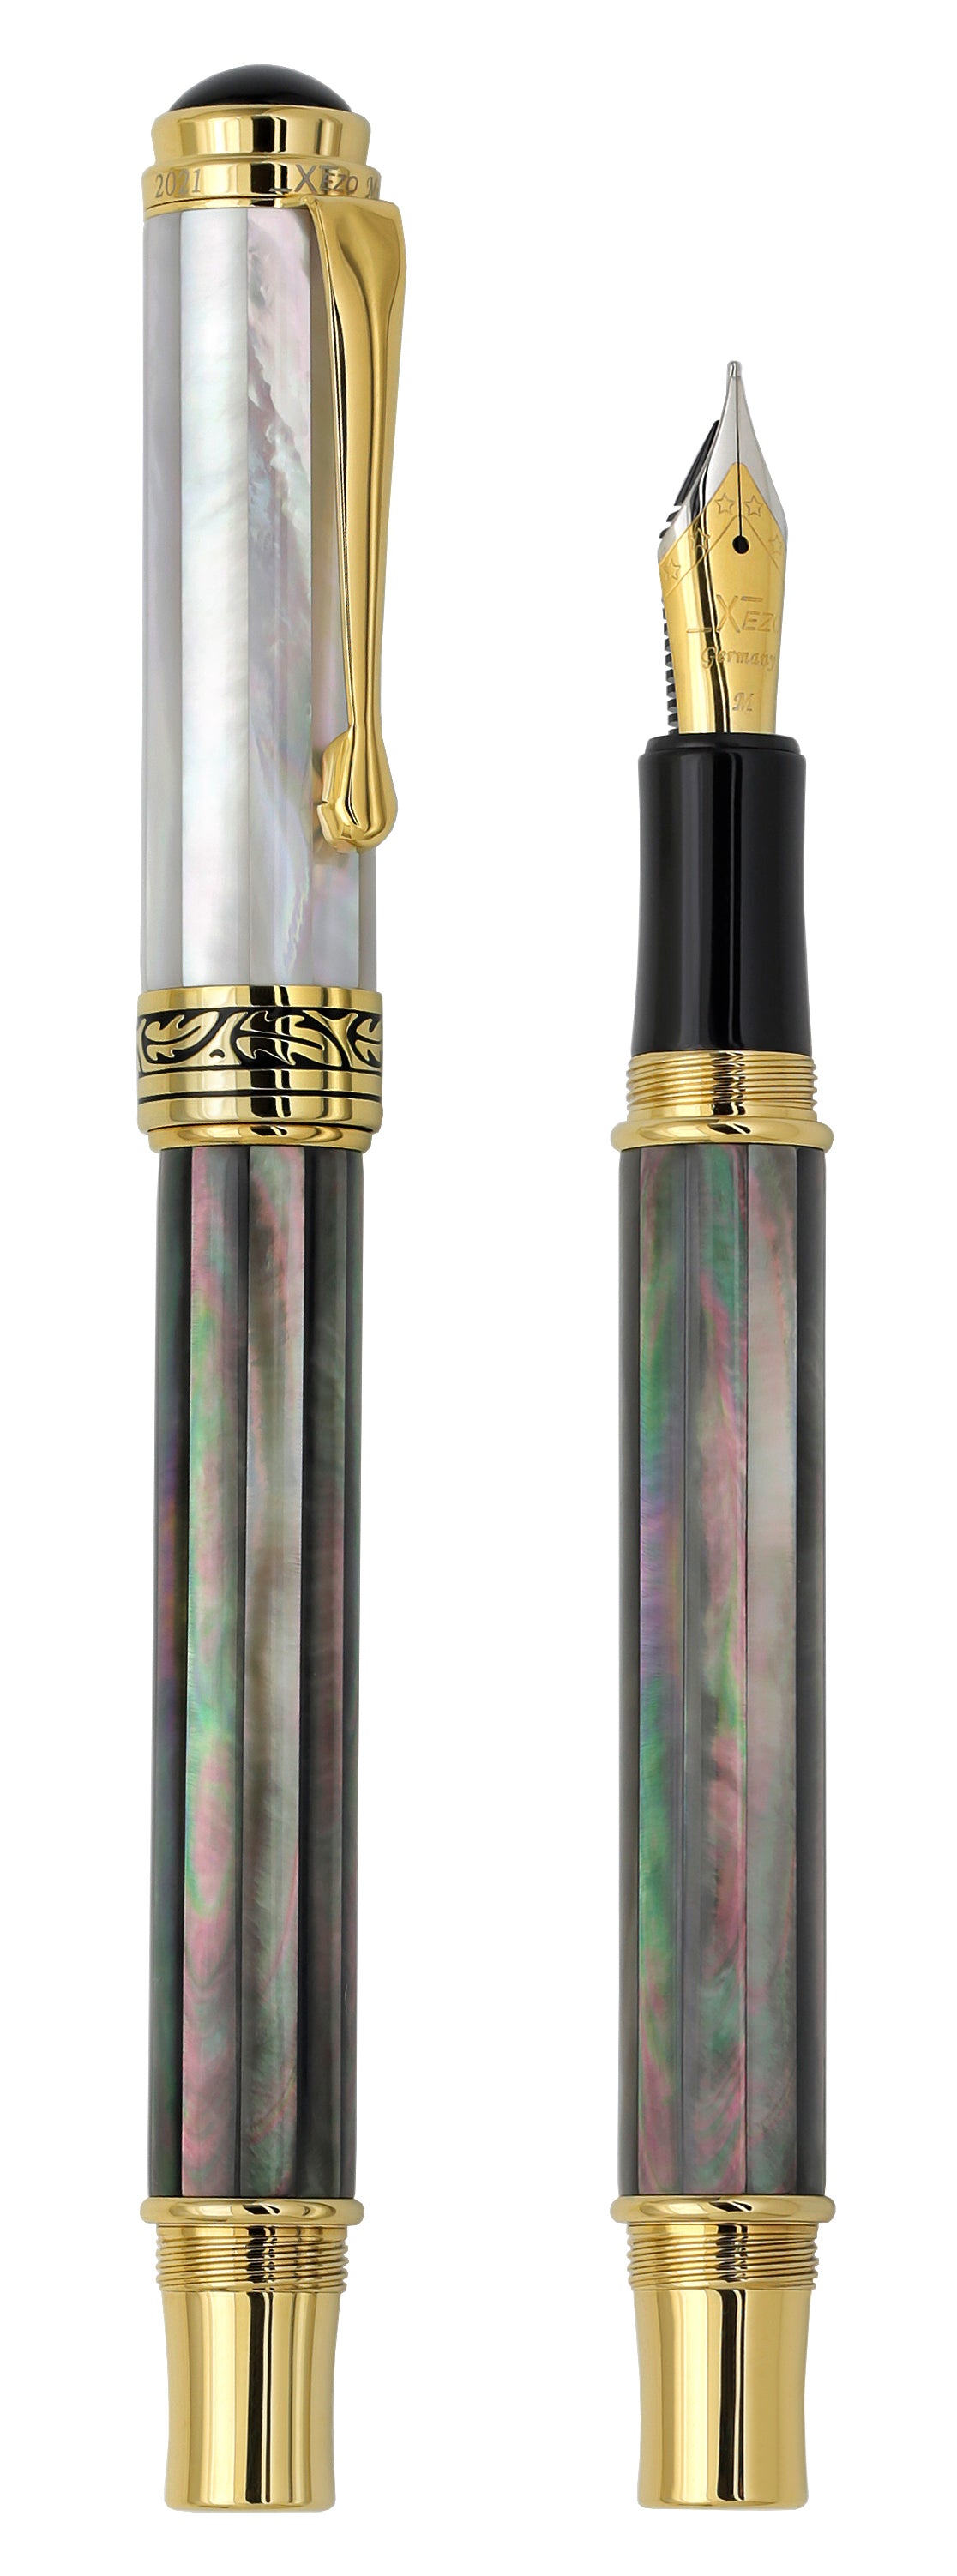 Xezo - Vertical view of two Maestro Black and White MOP FMG fountain pens. The pen on the left is capped, and the pen on the right has no cap